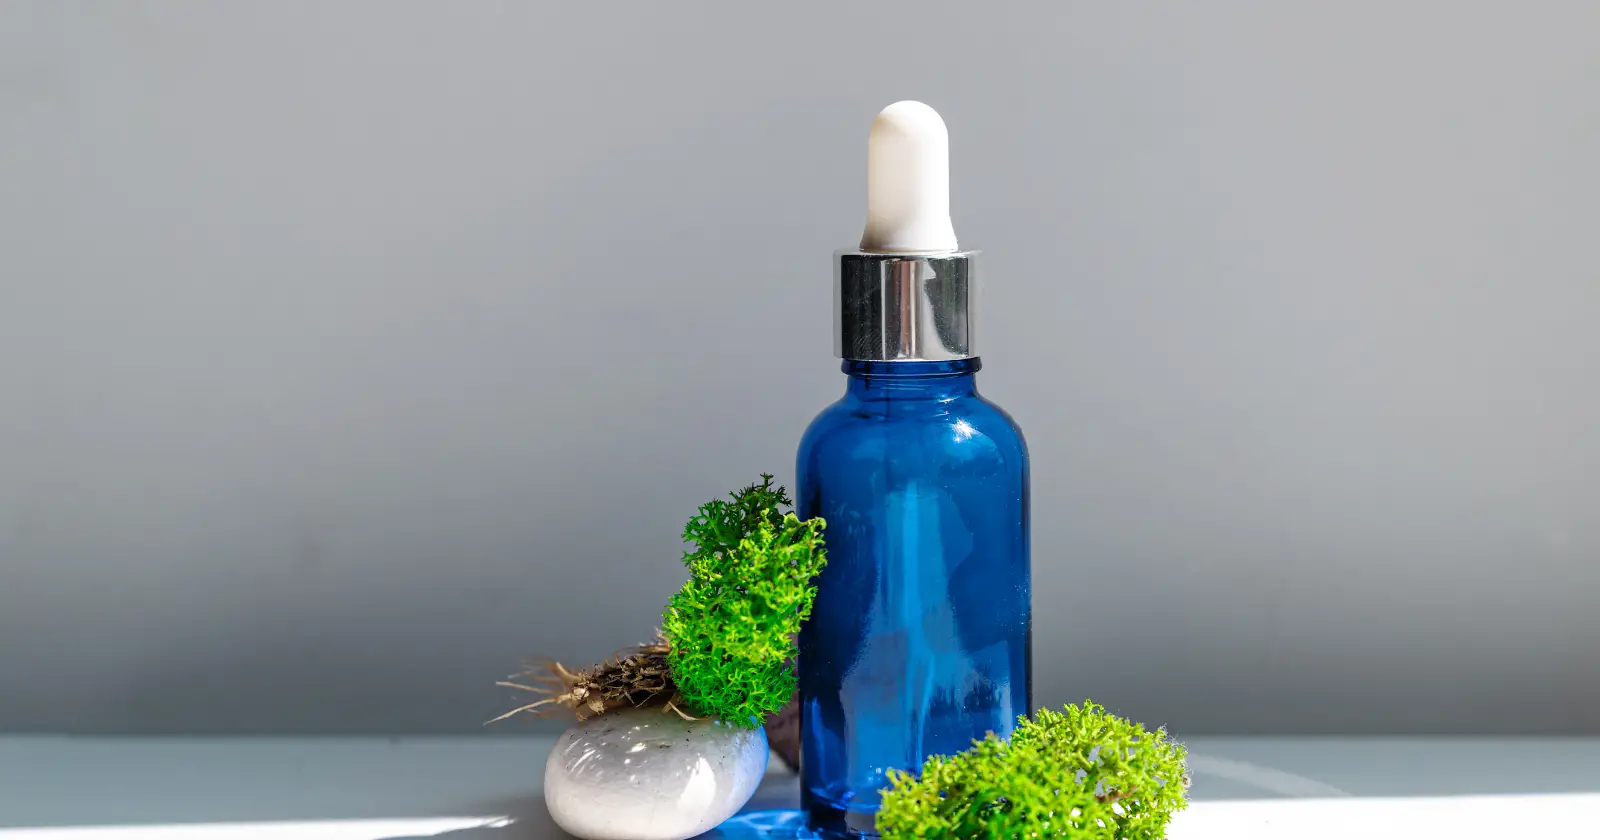 Benefits of Sea Moss – sea moss, a blue dropper bottle, and a petri dish on a table.